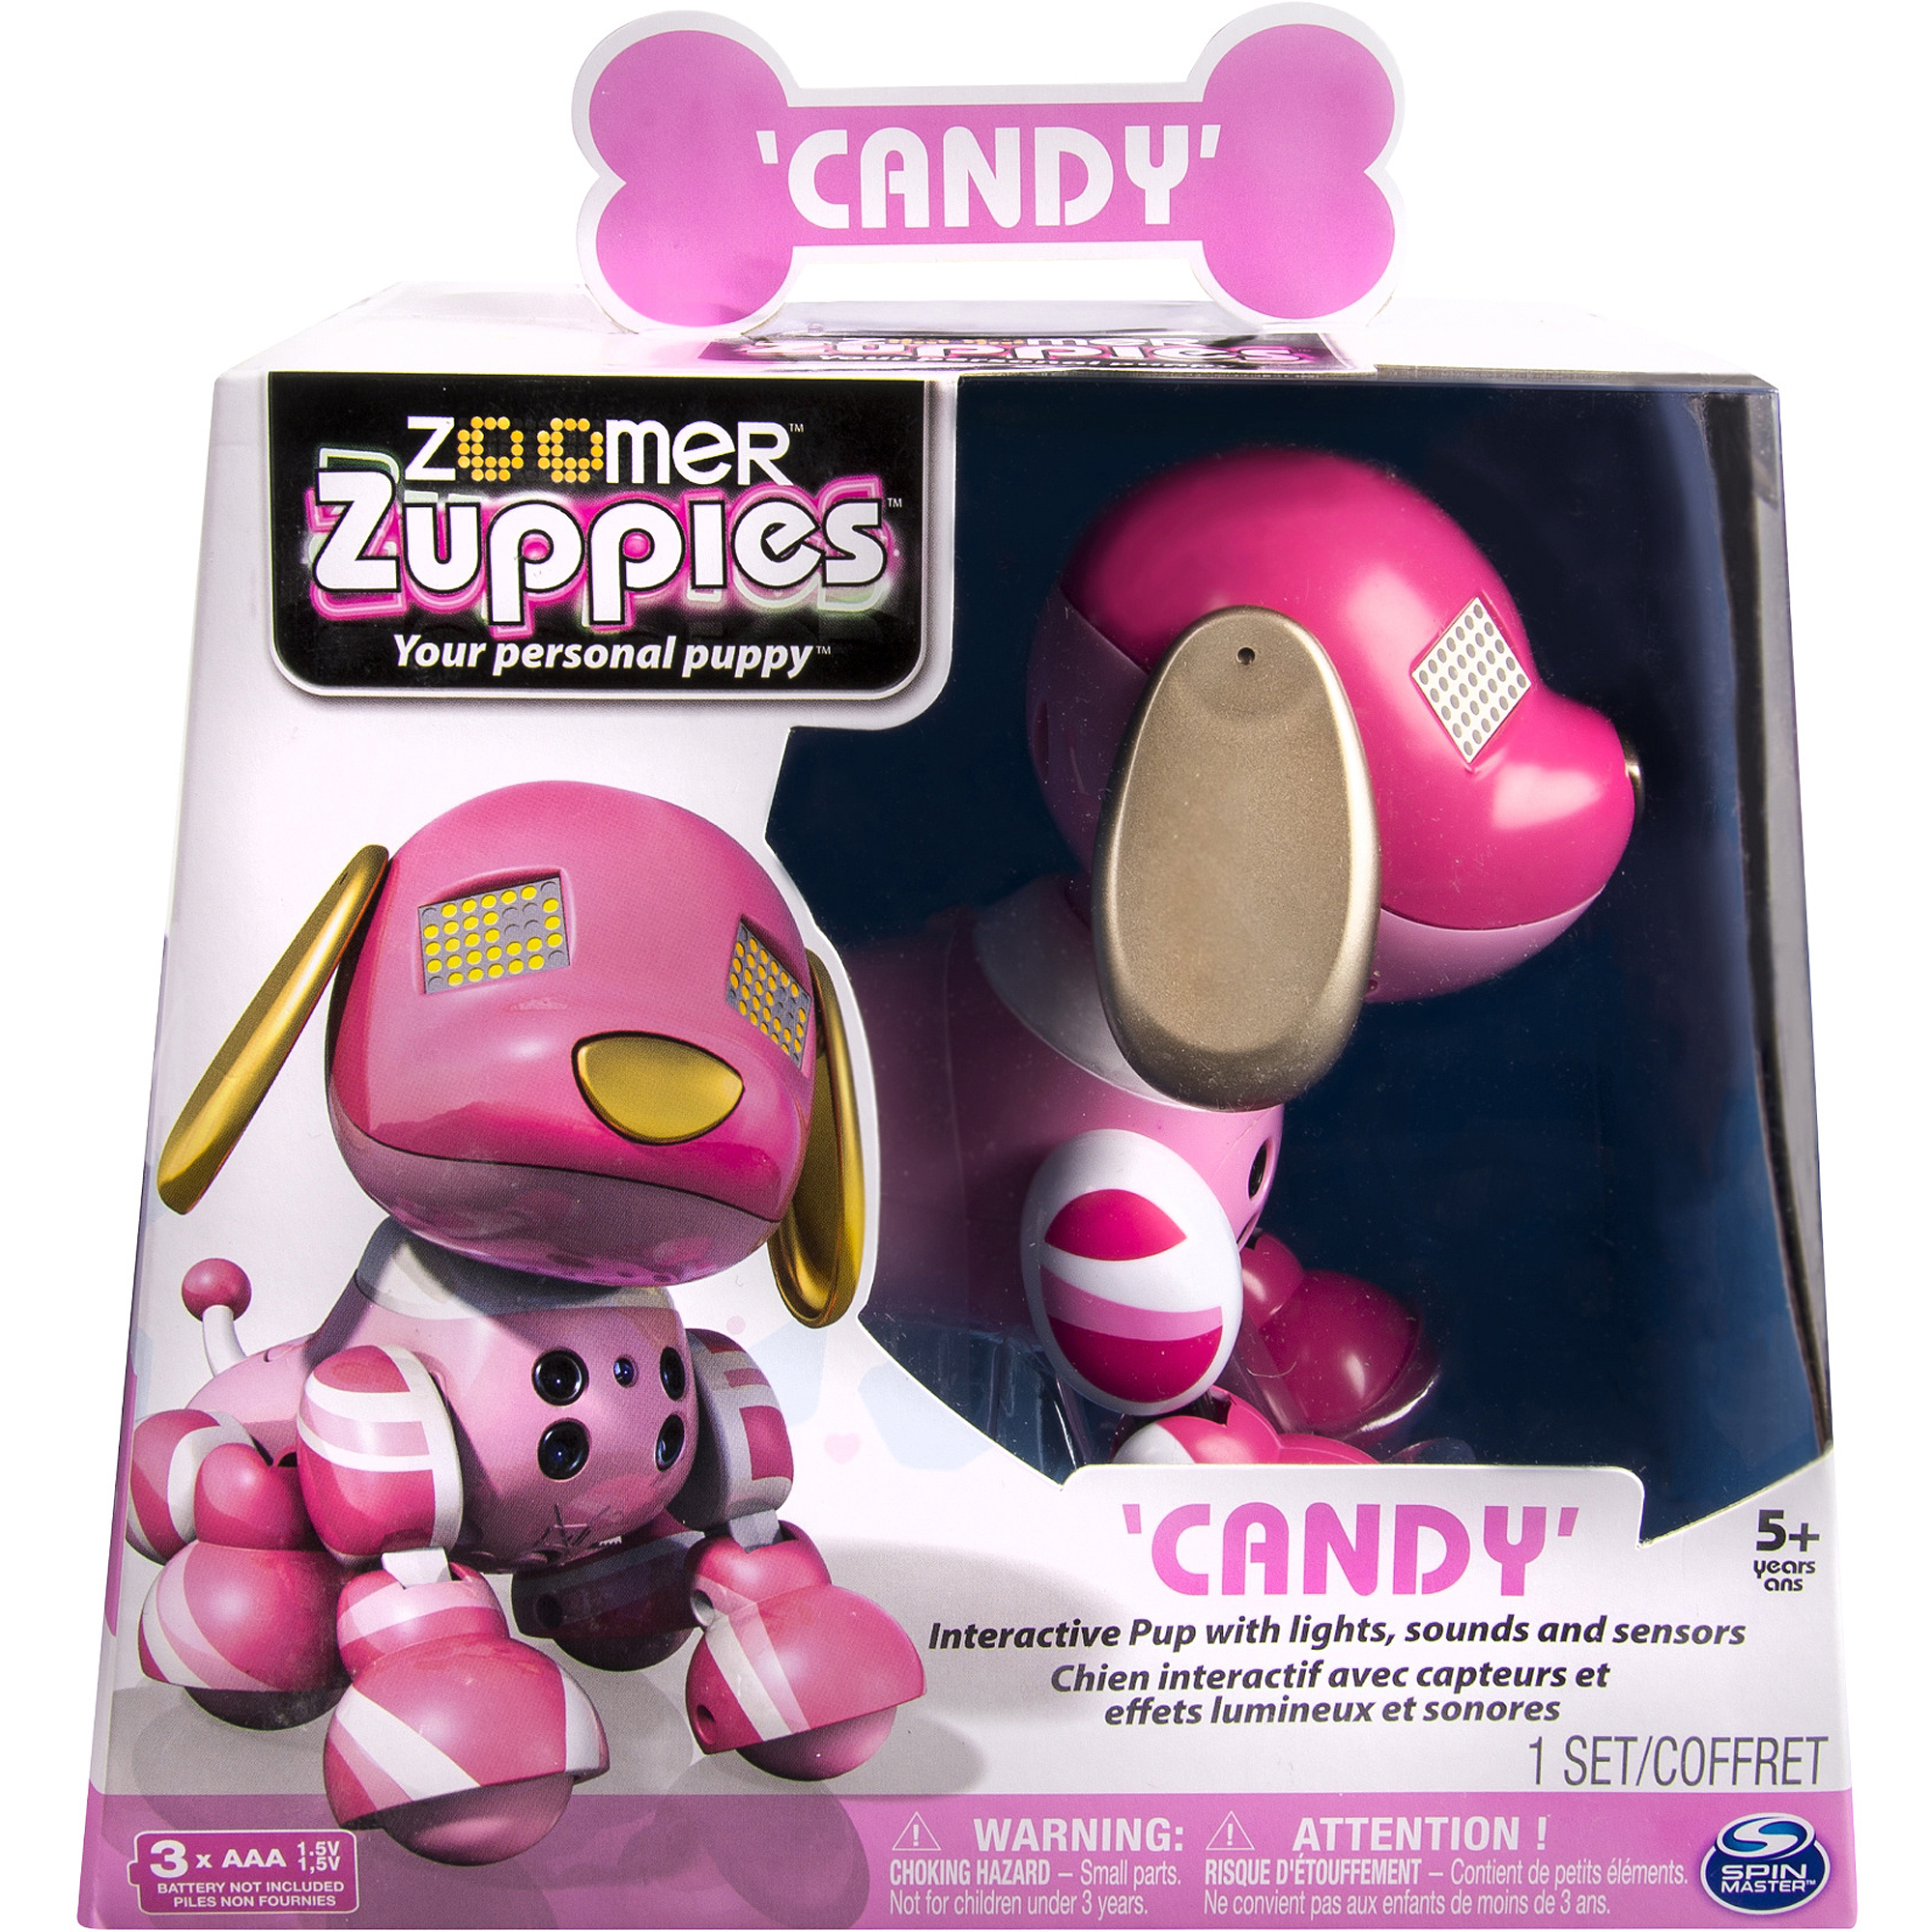 zoomer zuppies interactive puppy - candy - image 5 of 5